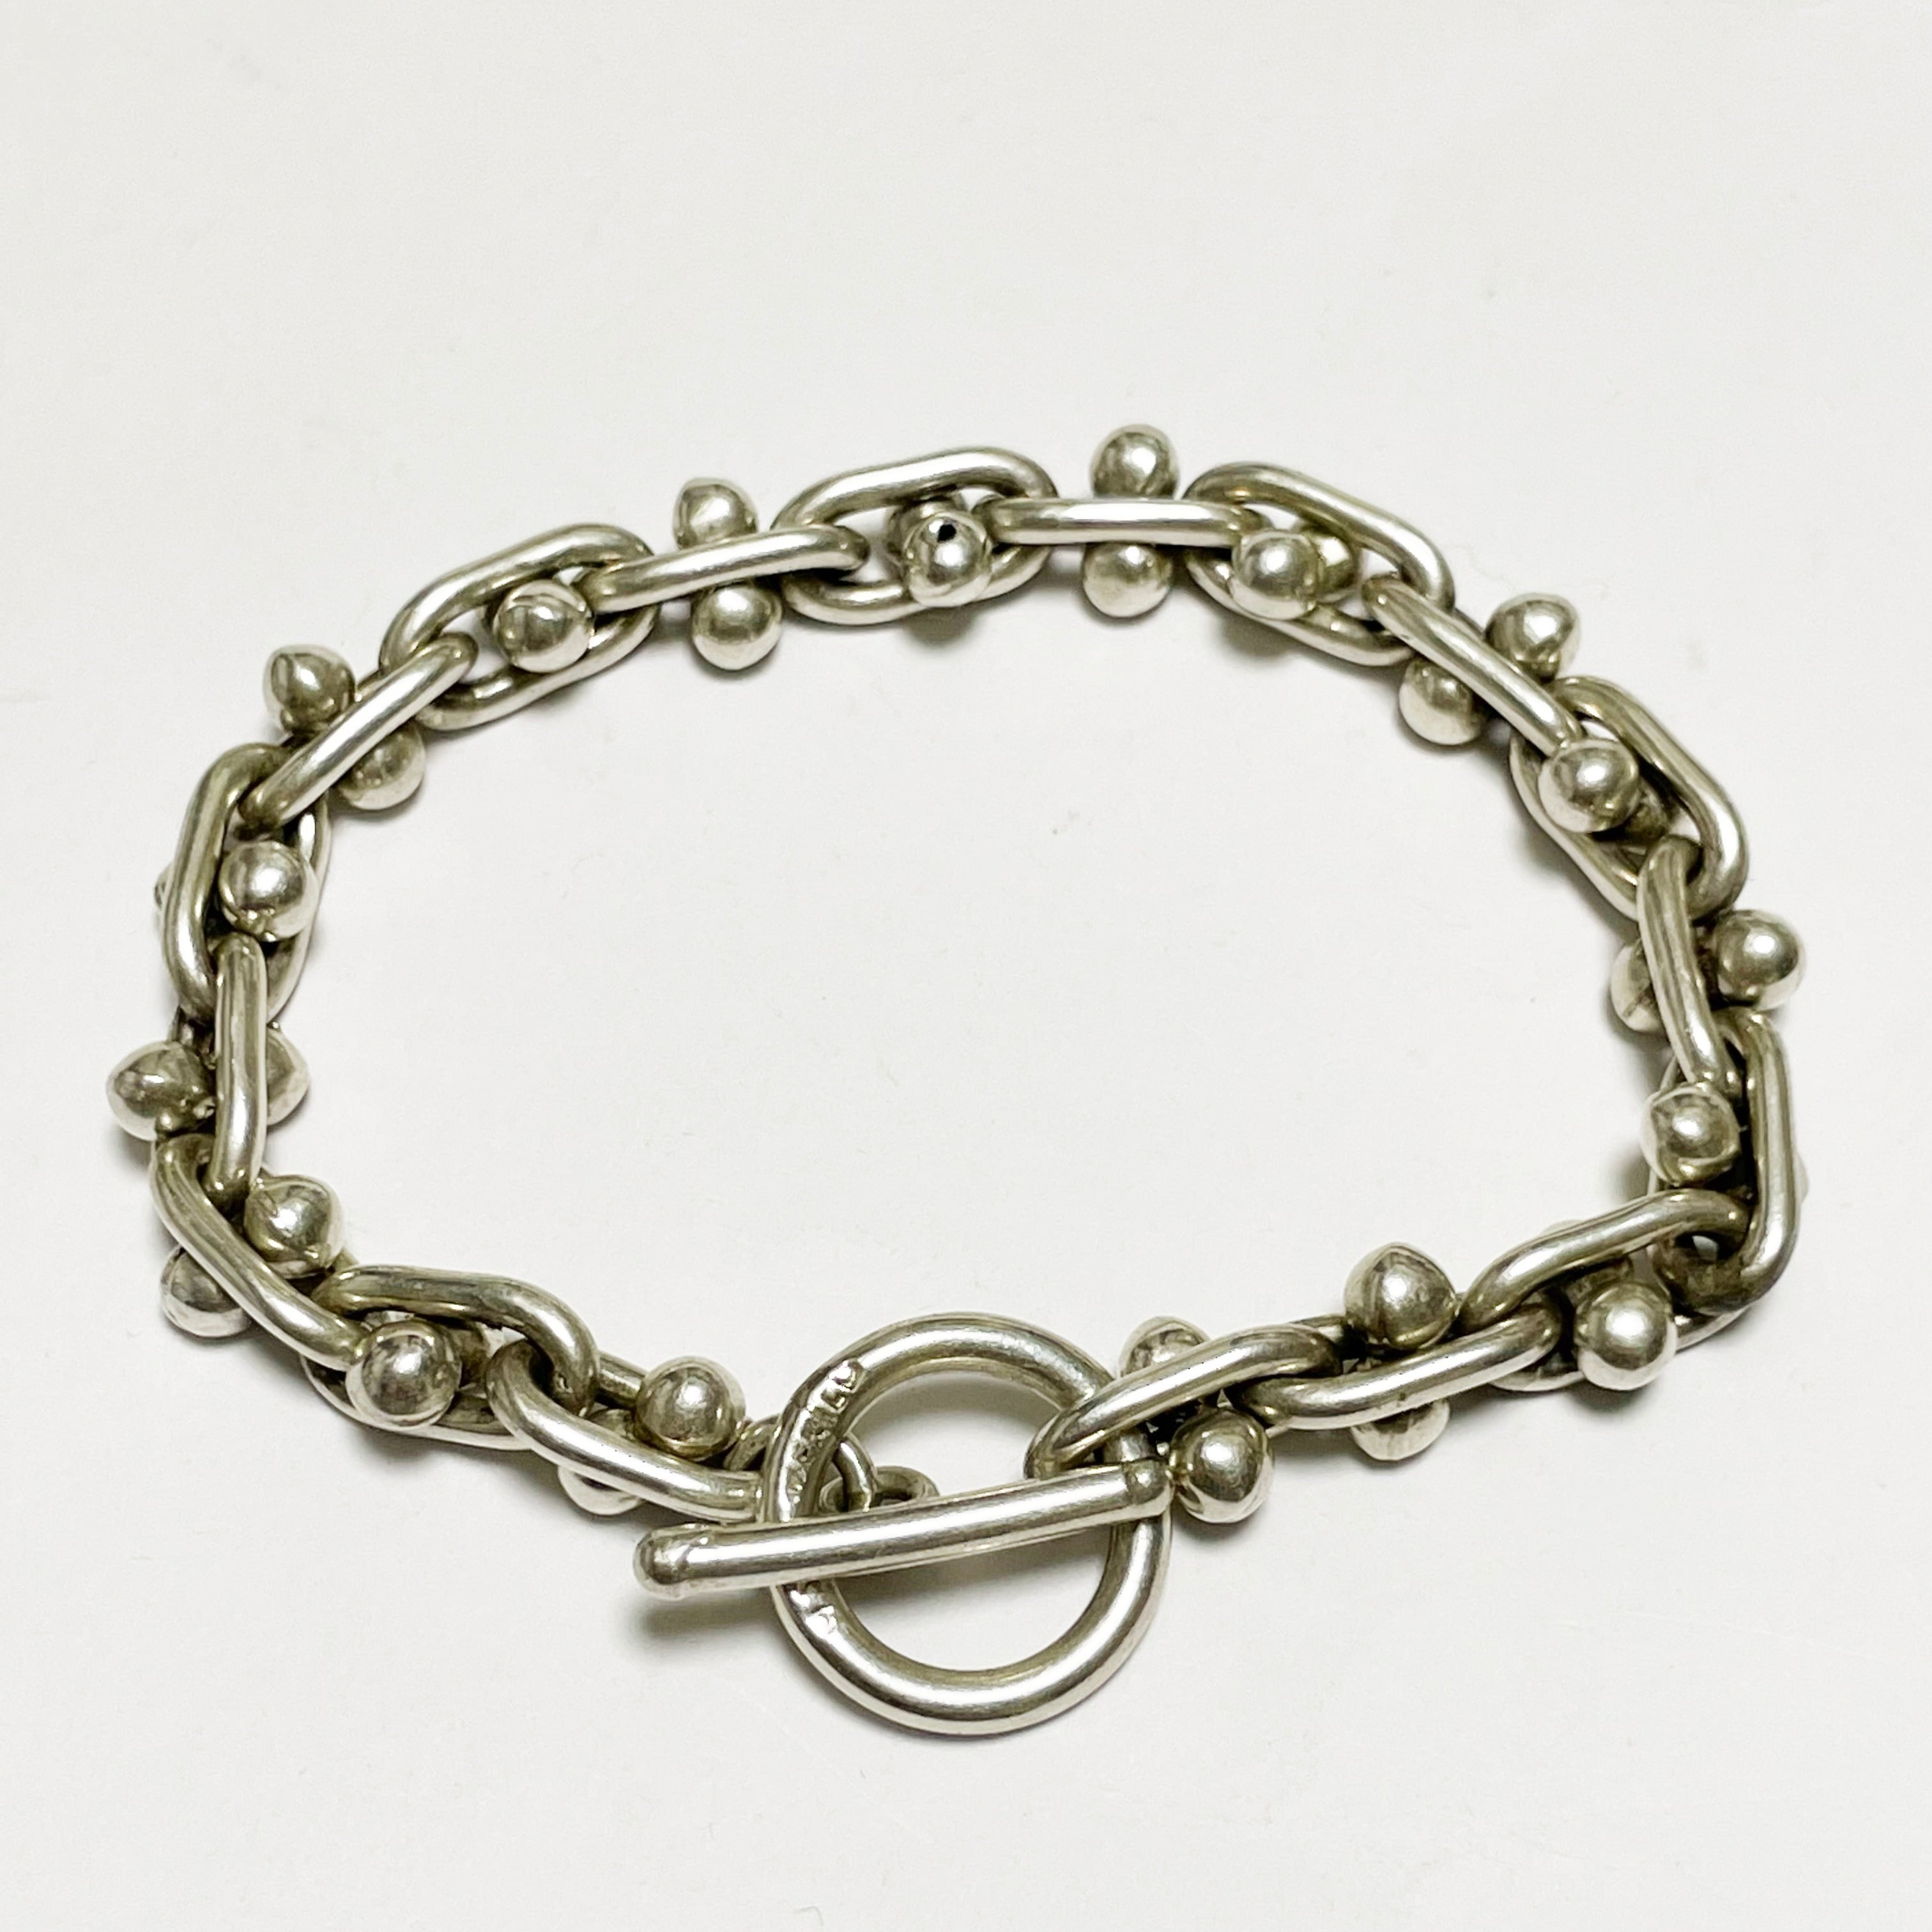 Vintage 925 Silver DNA Bracelet Made In Mexico | CORNER powered by BASE